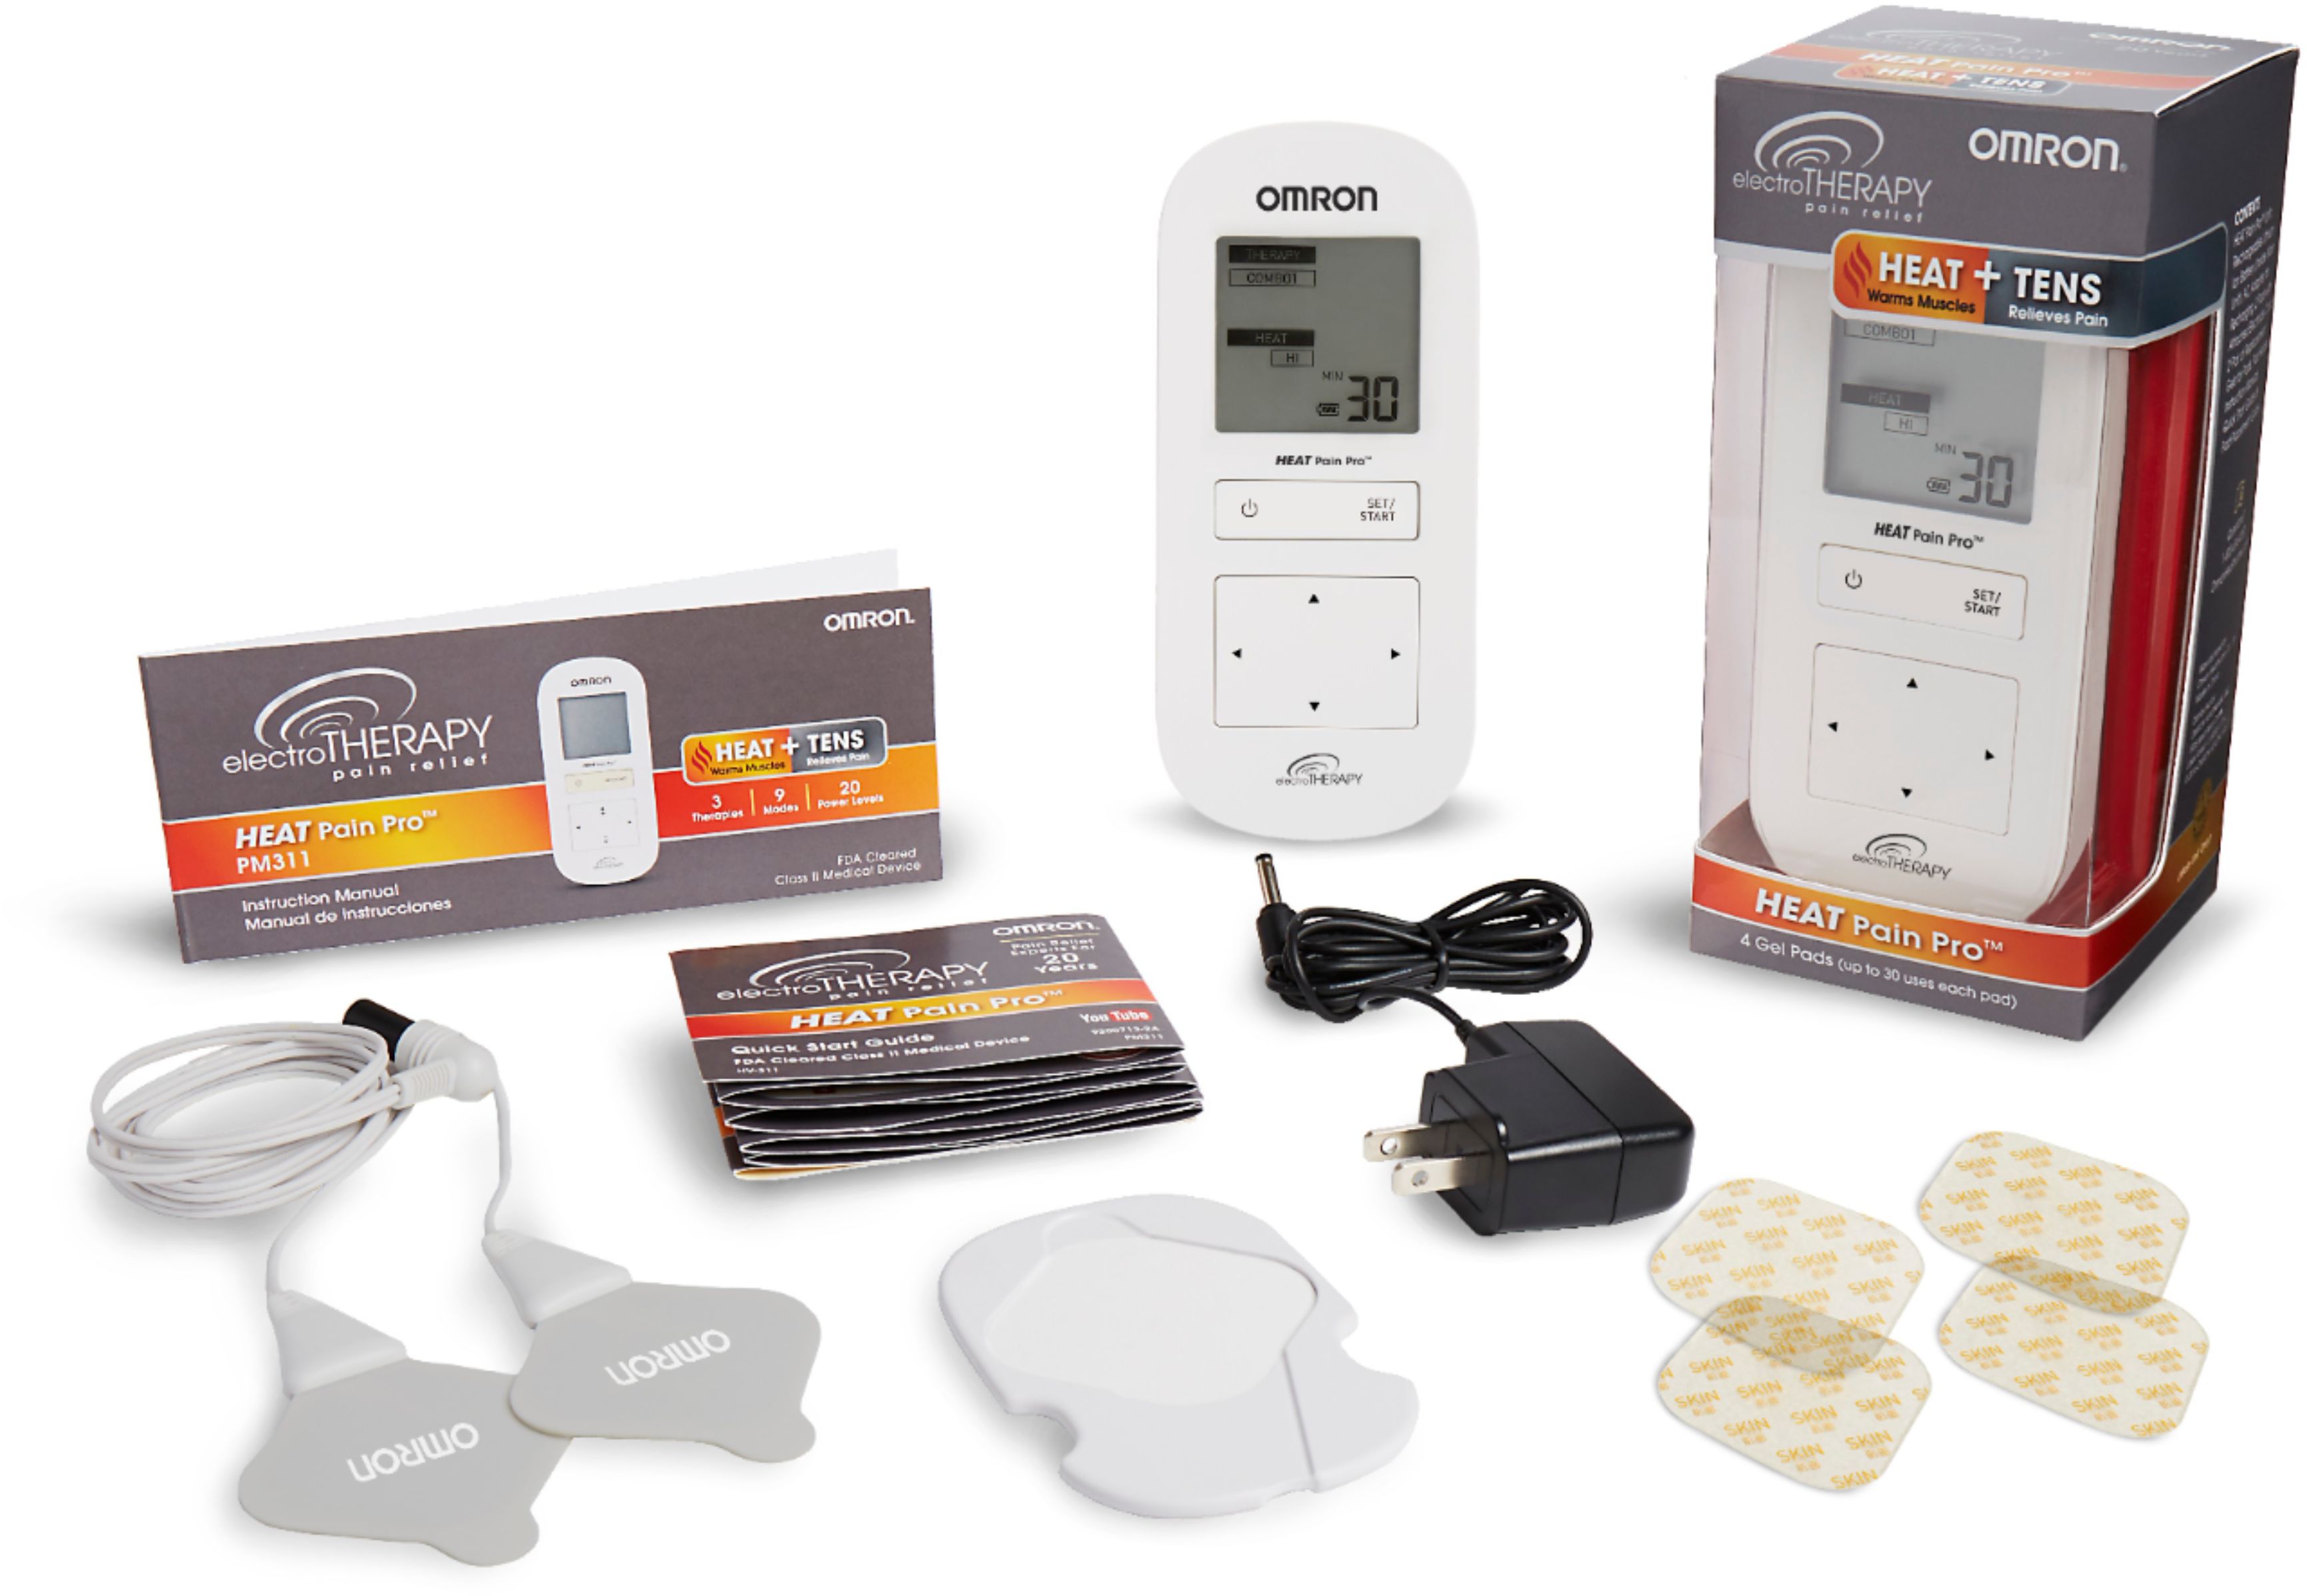 Questions and Answers: Omron Heat Pain Pro TENS Unit White PM311 - Best Buy